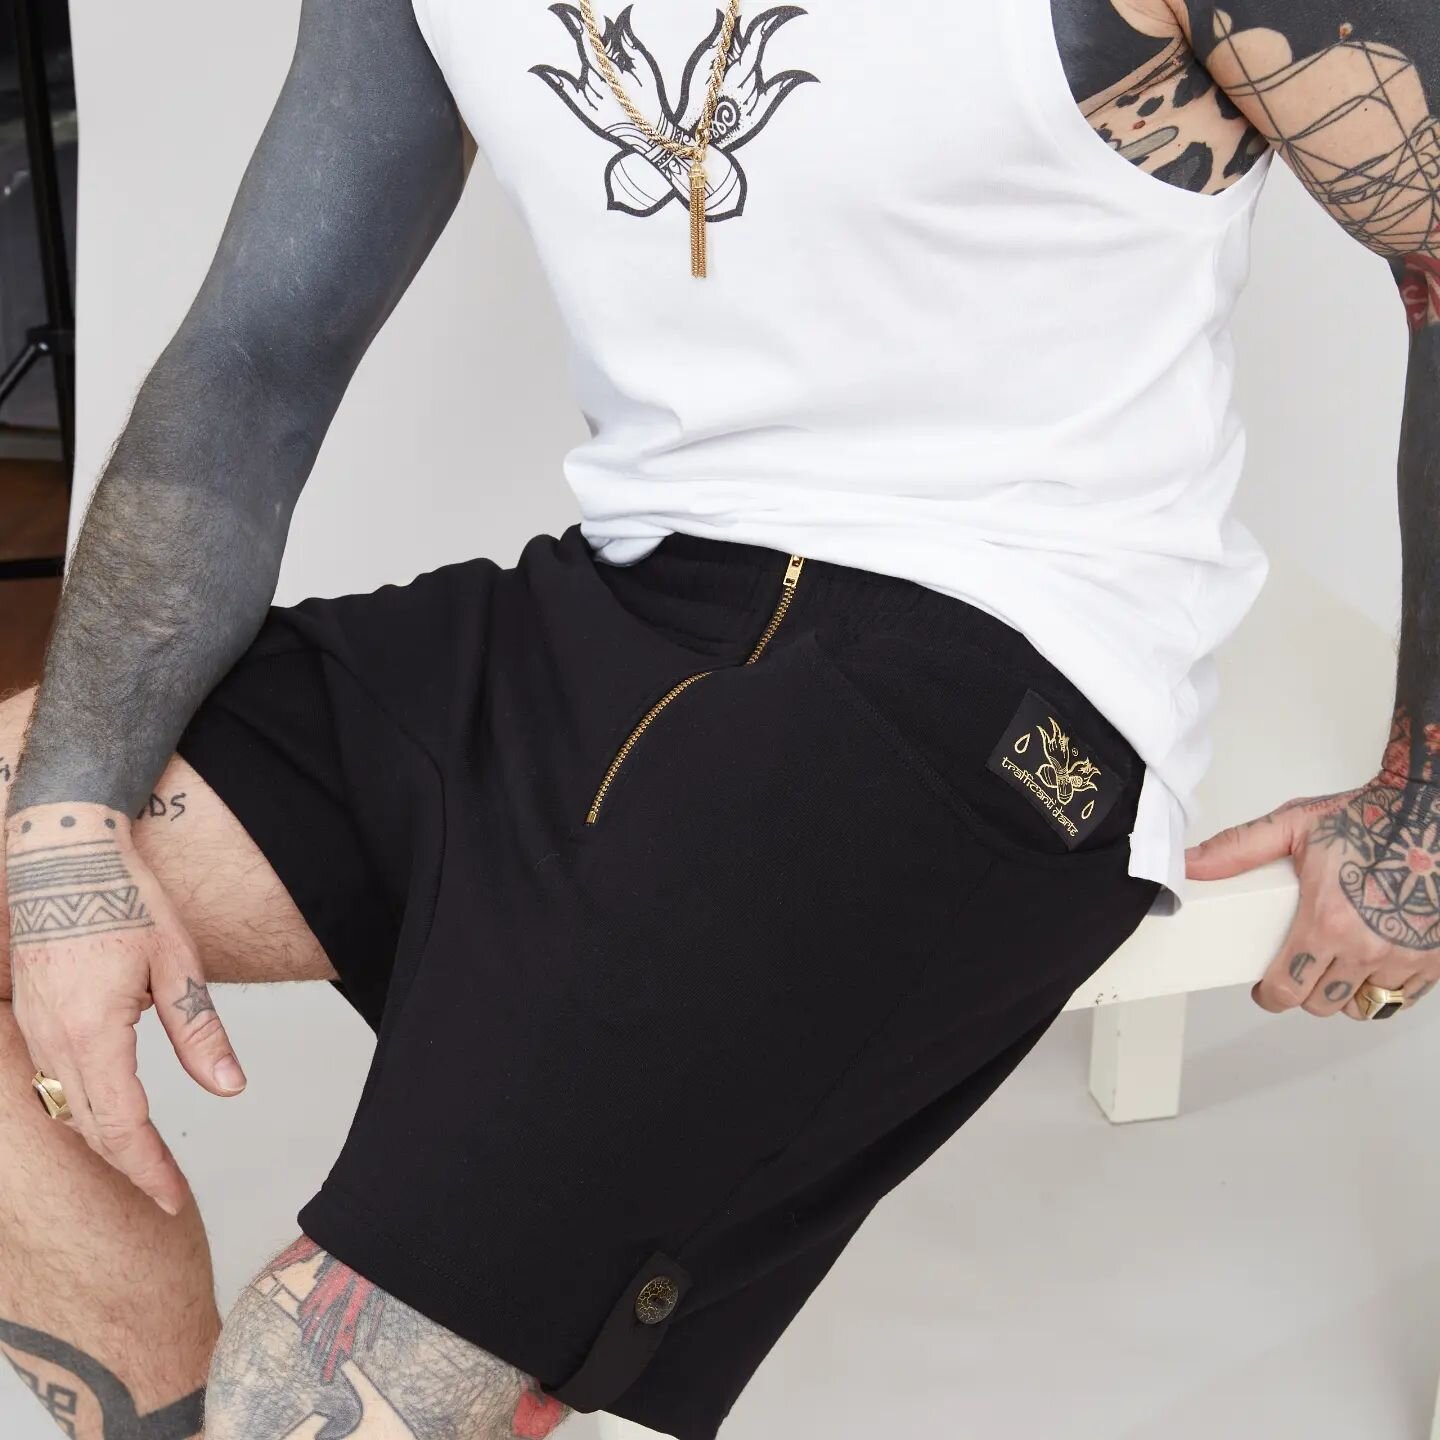 Discover the Thai shorts,
style and comfort in perfect balance in this garment of ours🖤

www.trafficantidartewear.com 

#trafficantidarte #brand #madeinitaly #thai #shorts #summervibes #style #streetwear #fusion